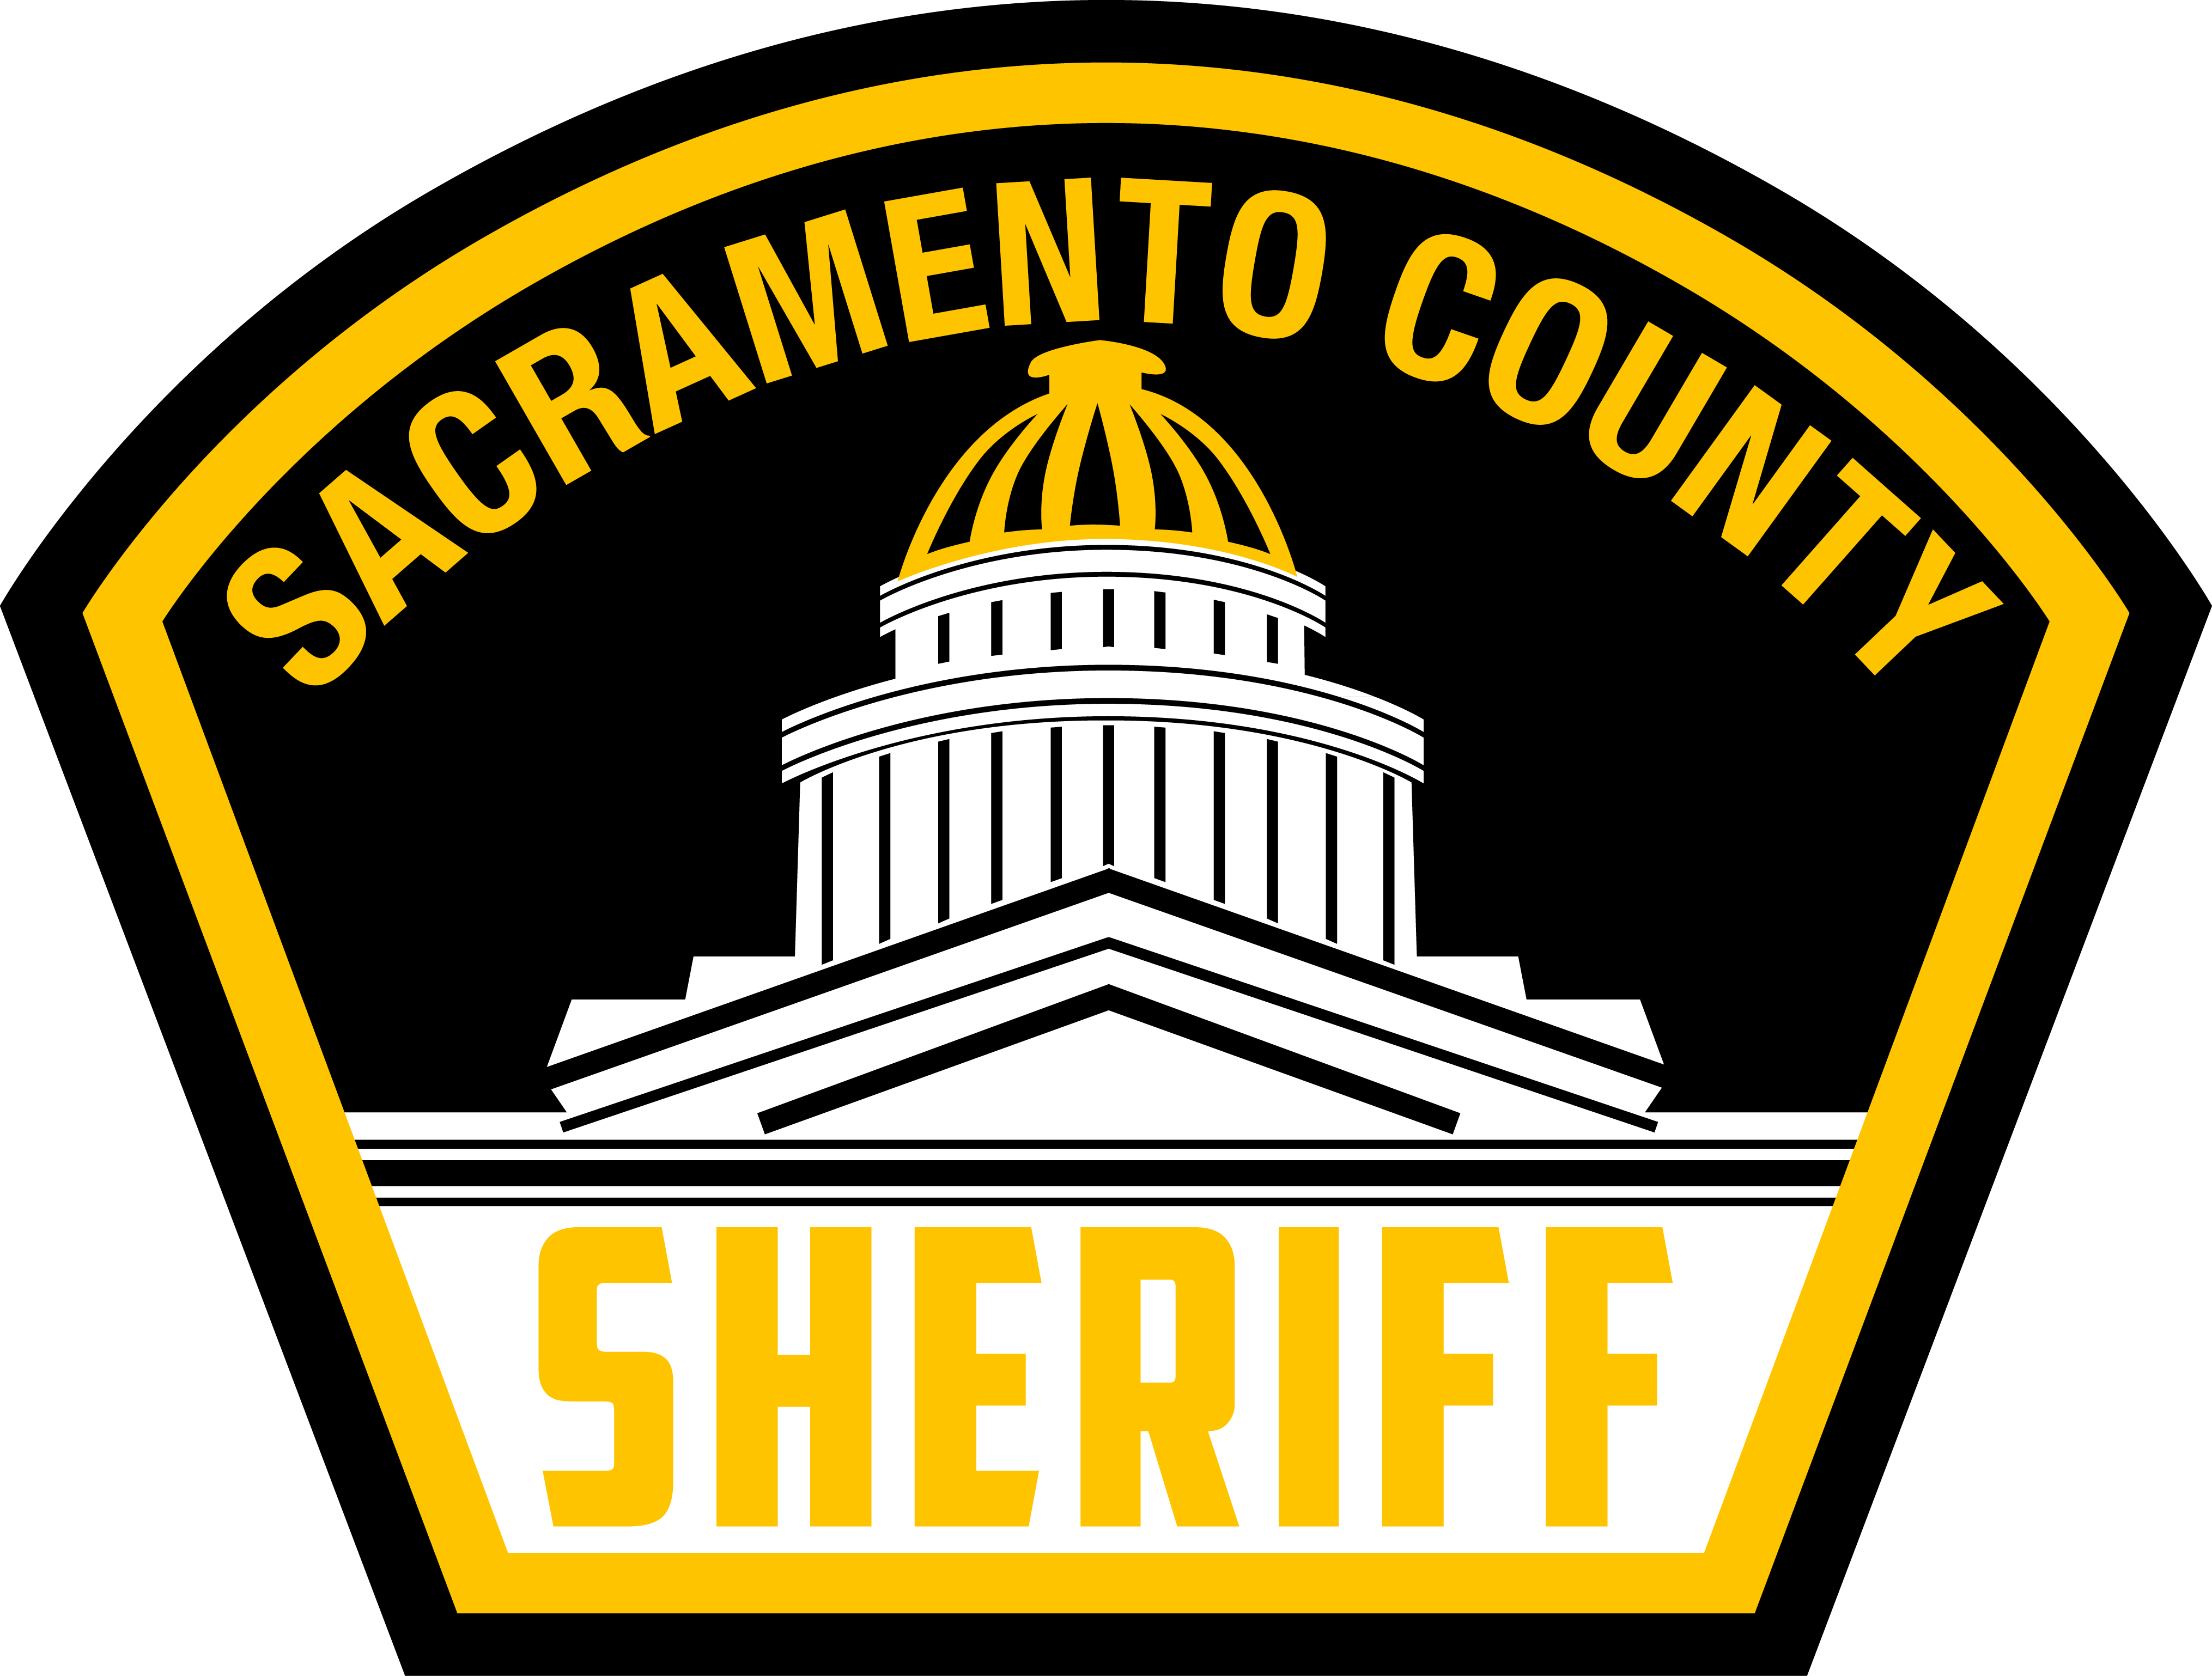 Sacramento County Sheriff’s Office Becomes Third Agency in County to Transition to eSOPH